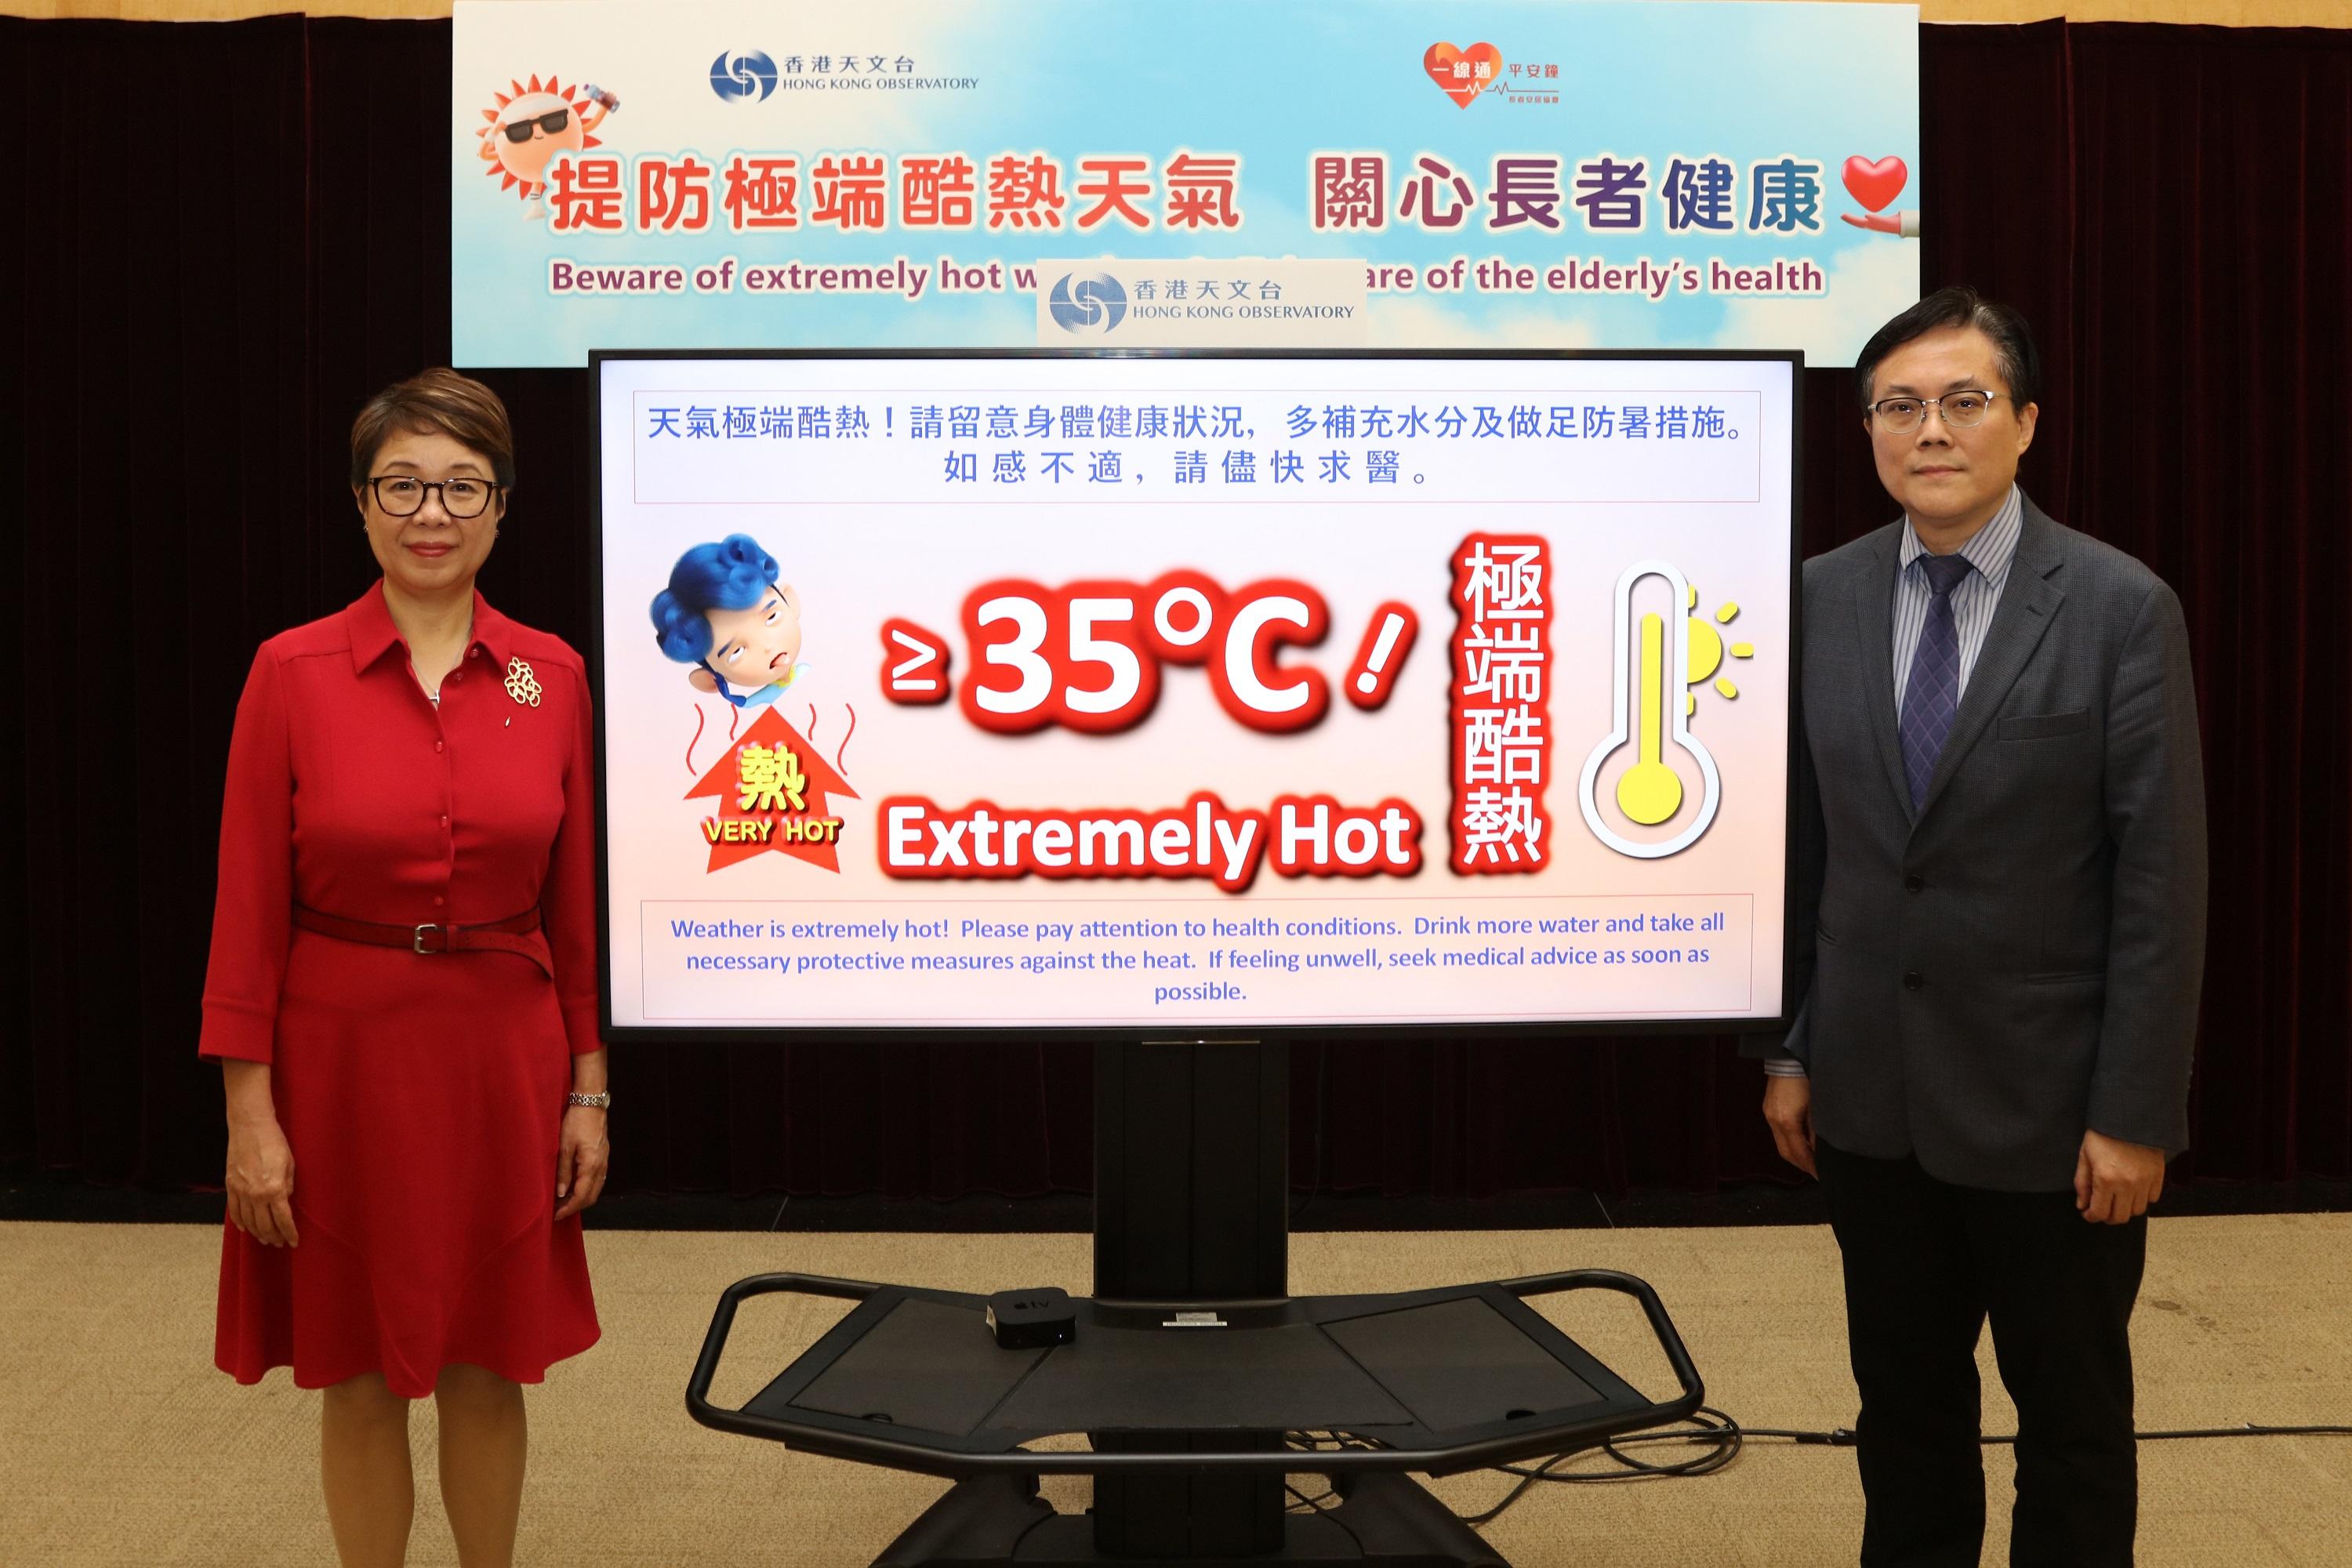 The Acting Assistant Director of the Hong Kong Observatory, Mr Cheng Yuen-chung, and the Chief Executive Officer of the Senior Citizen Home Safety Association, Ms Maura Wong, held a joint press conference today (June 27) to remind the public to get prepared for the very hot weather in summer.